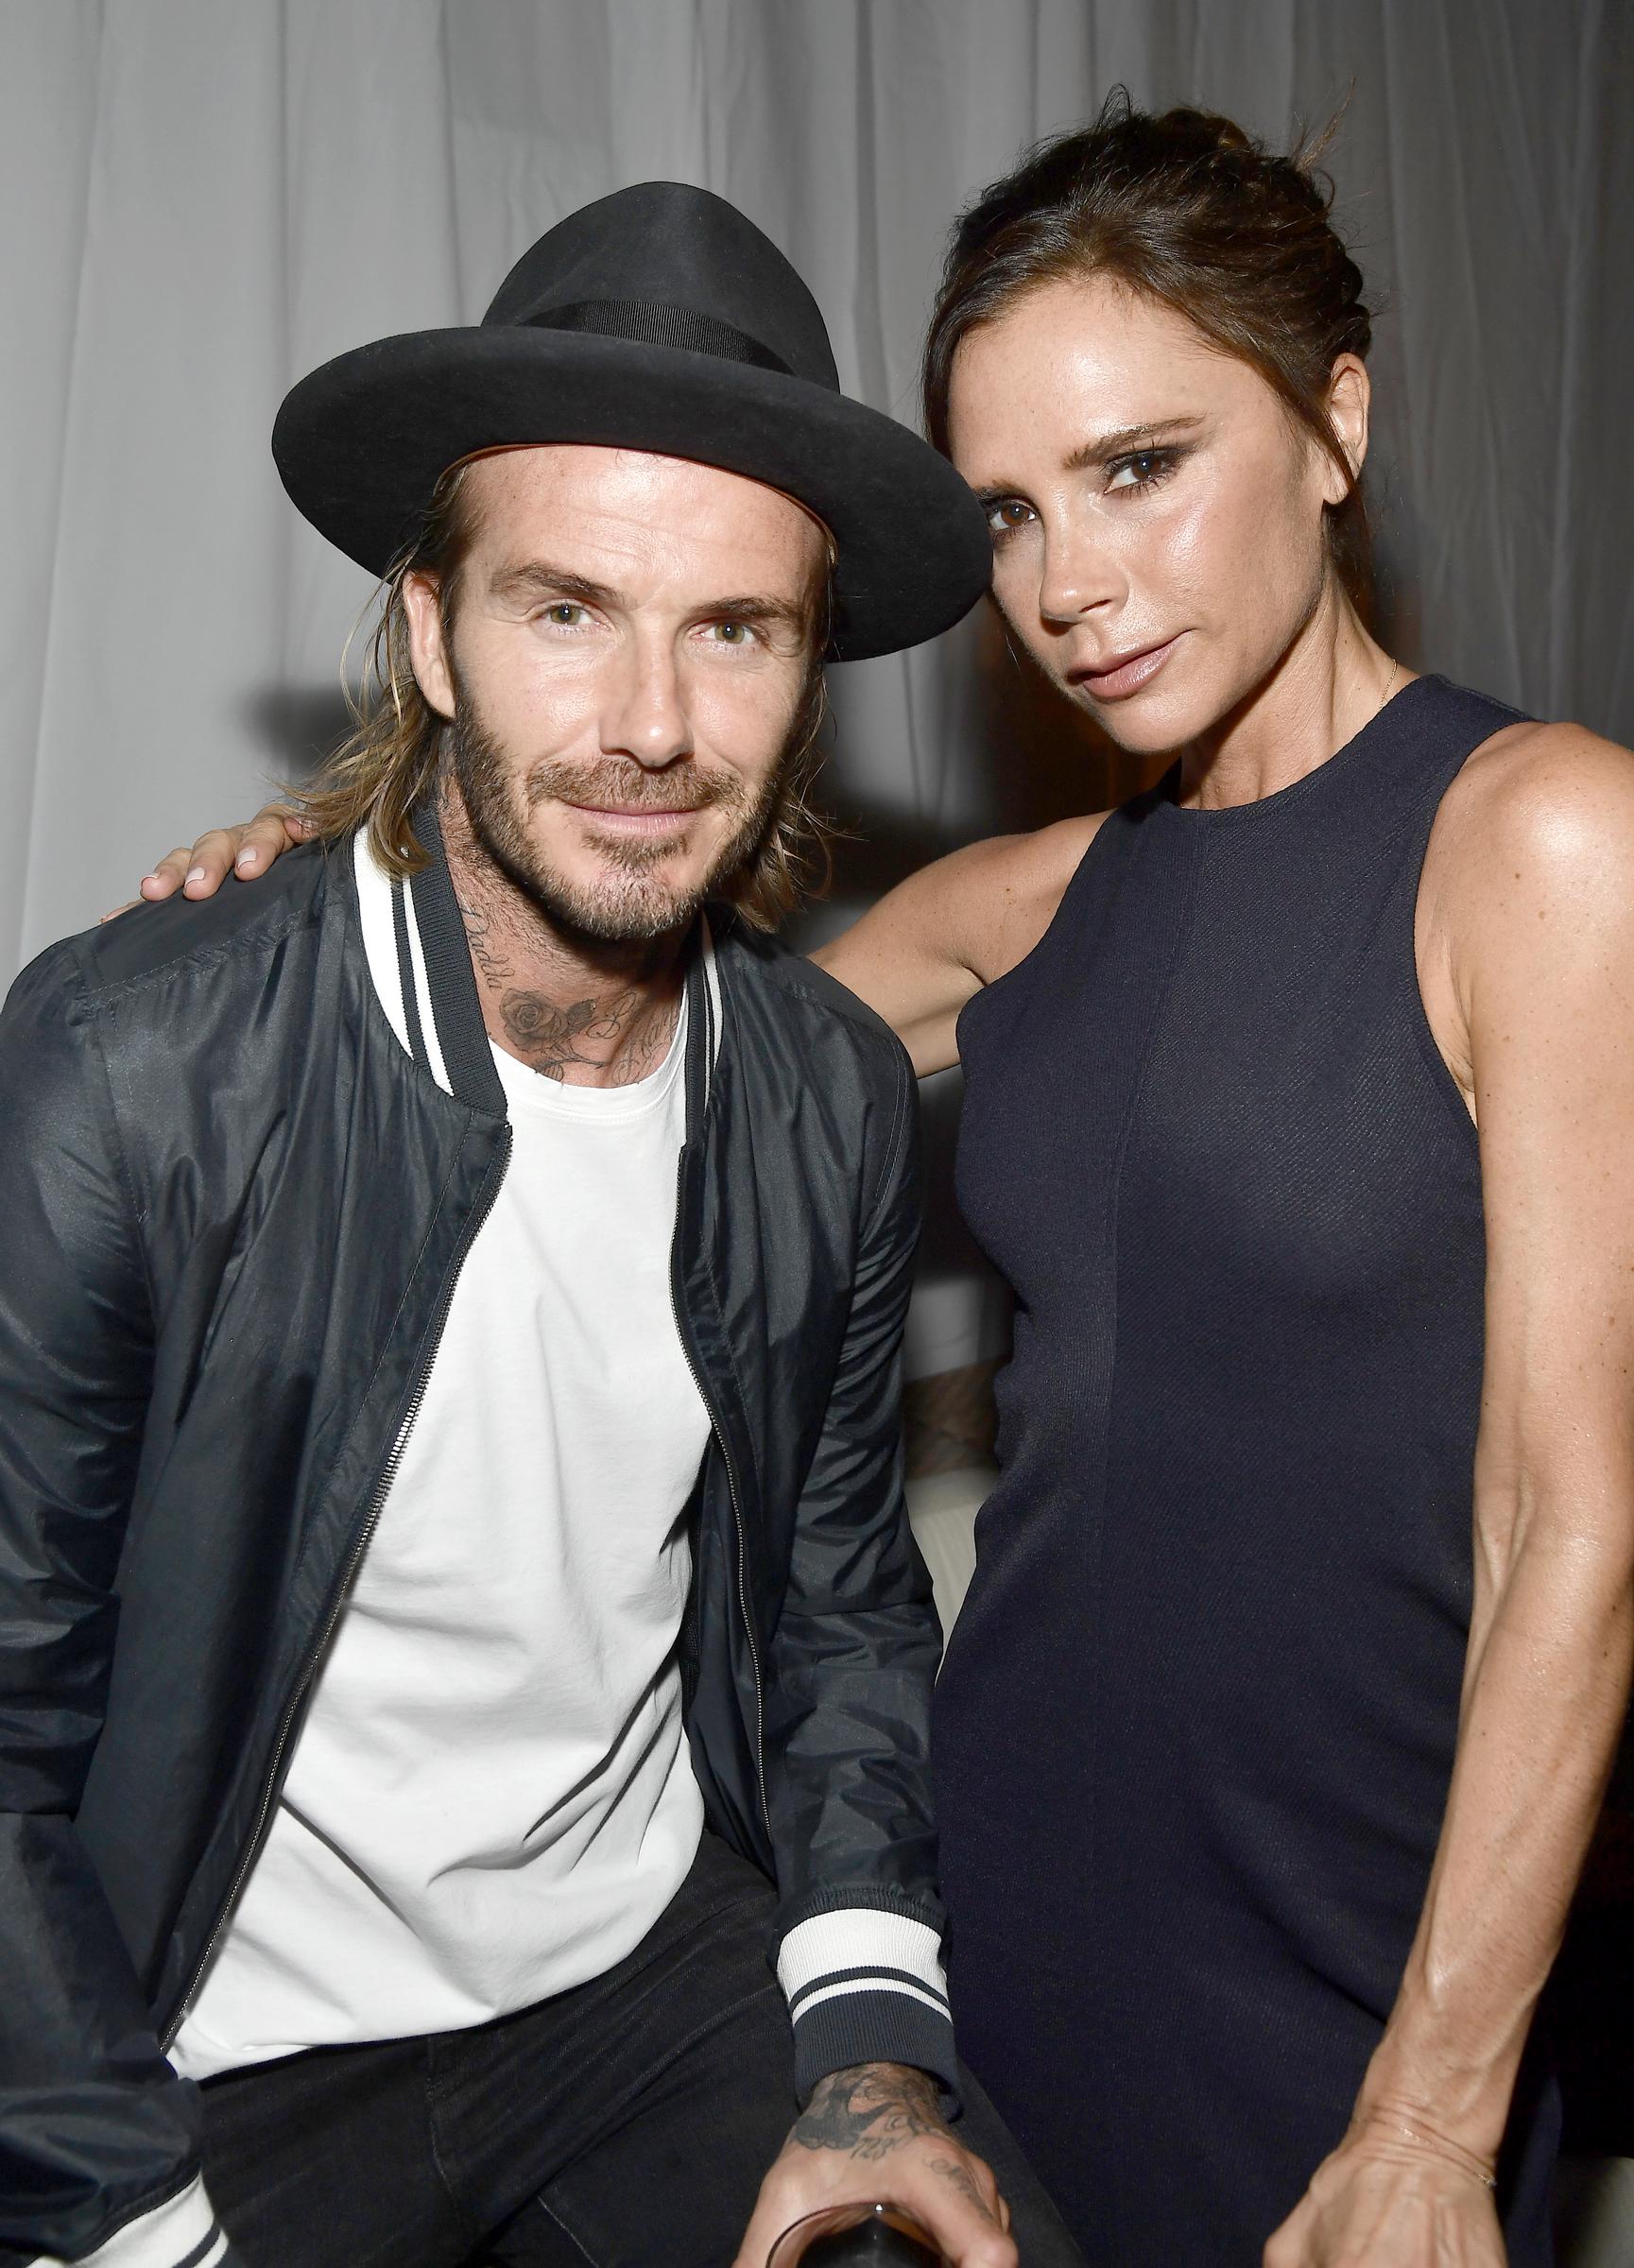 David and Victoria Beckham at the grand opening of the Ken Paves Salon hosted by Eva Longoria on October 23, 2017, in Los Angeles, California | Source: Getty Images